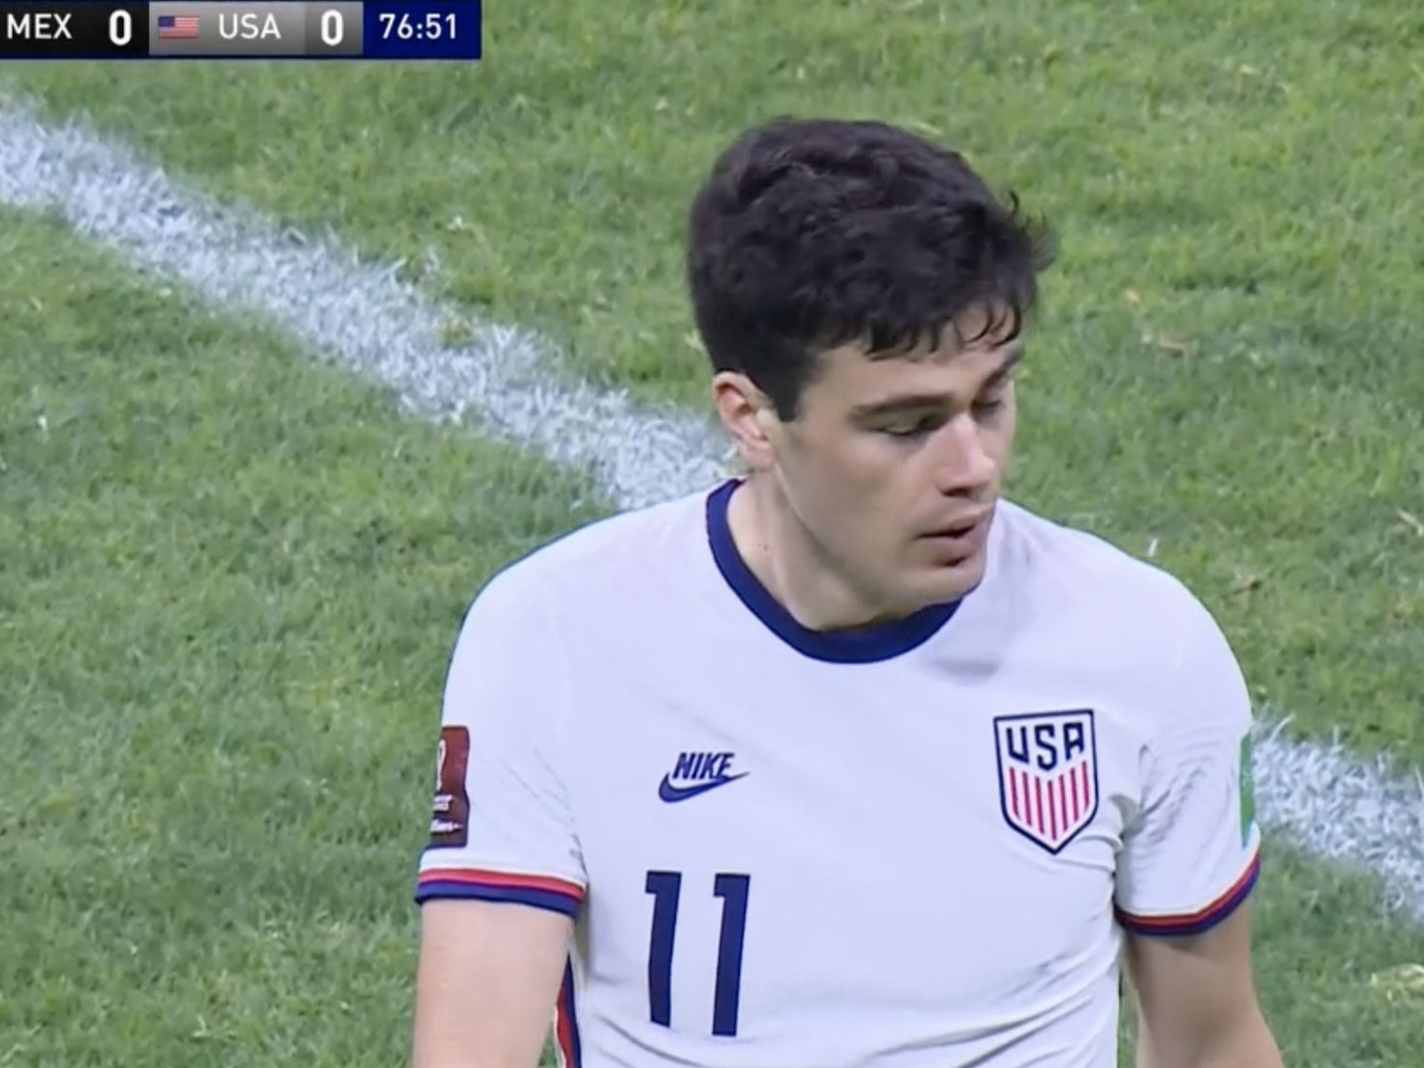 The 16-second run from Gio Reyna USMNT fans are freaking out about